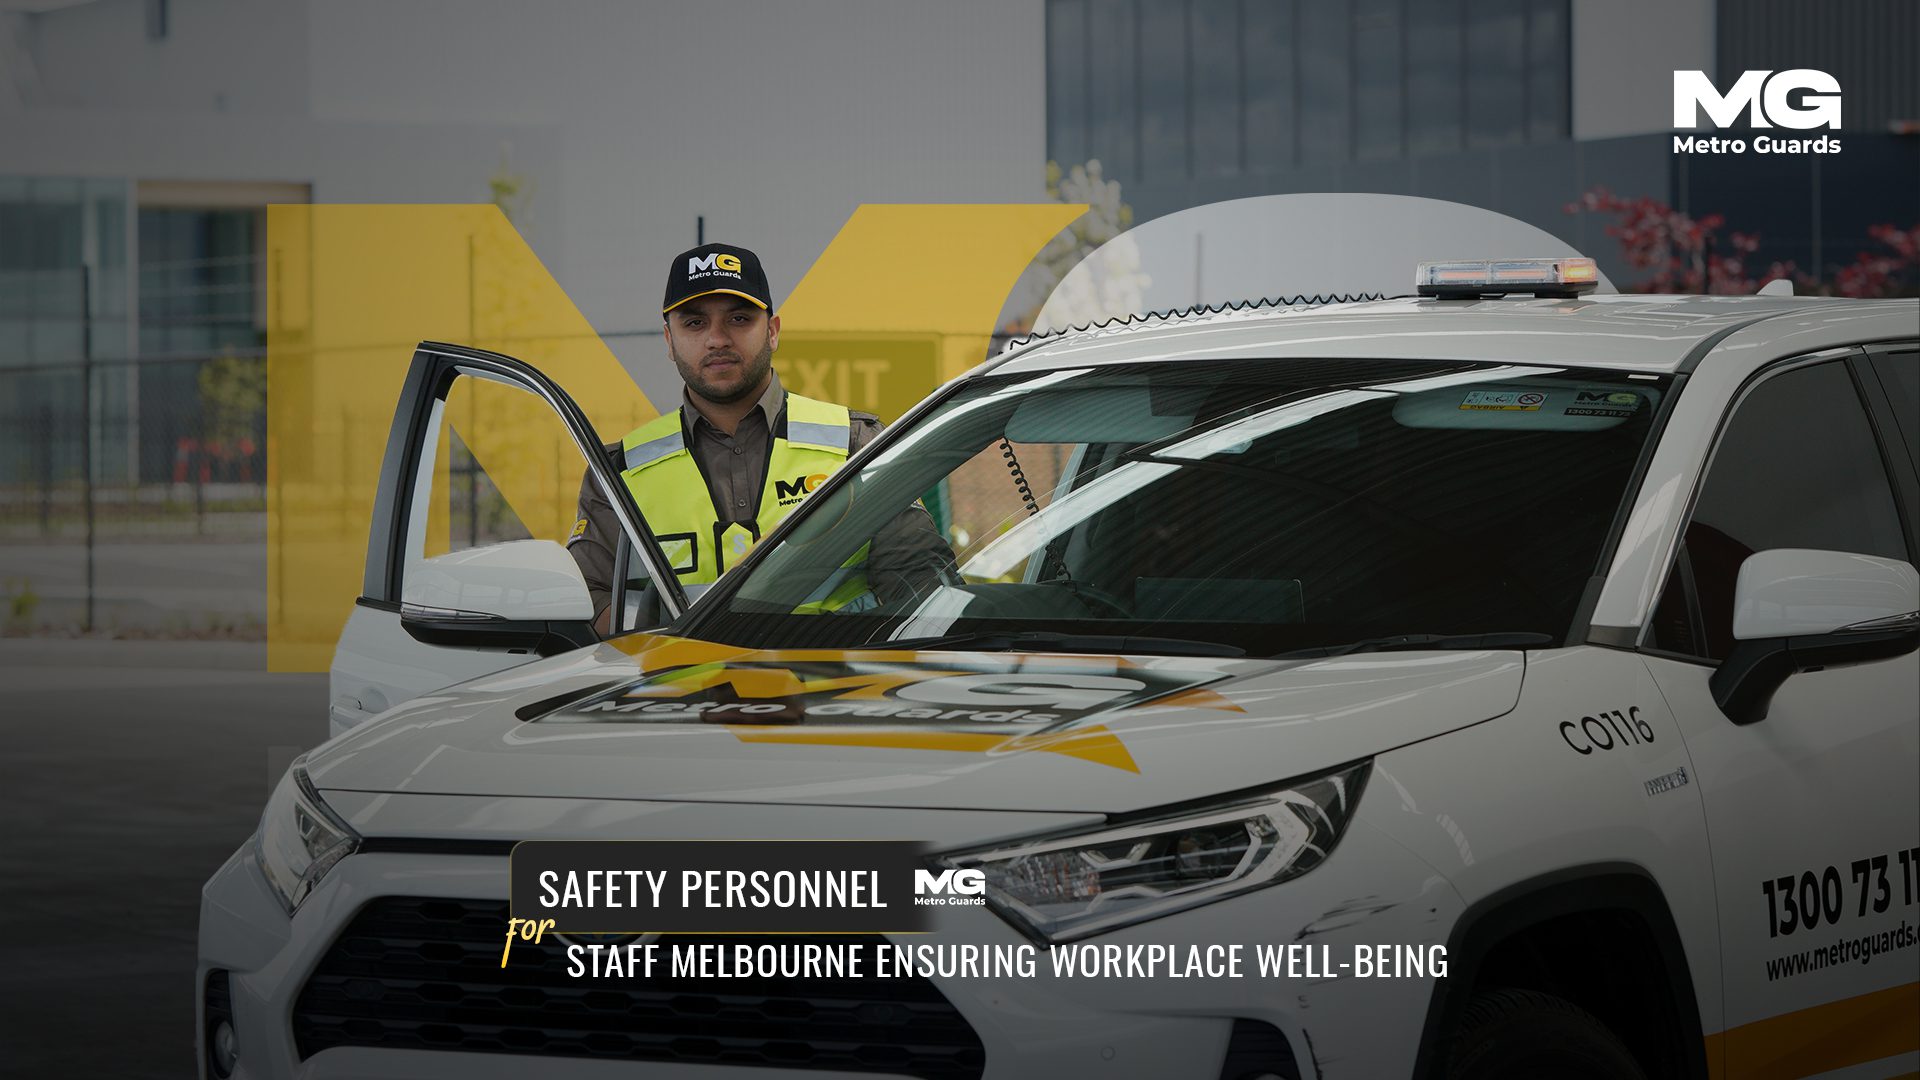 Safety Personnel for Staff Melbourne: Ensuring Workplace Well-Being